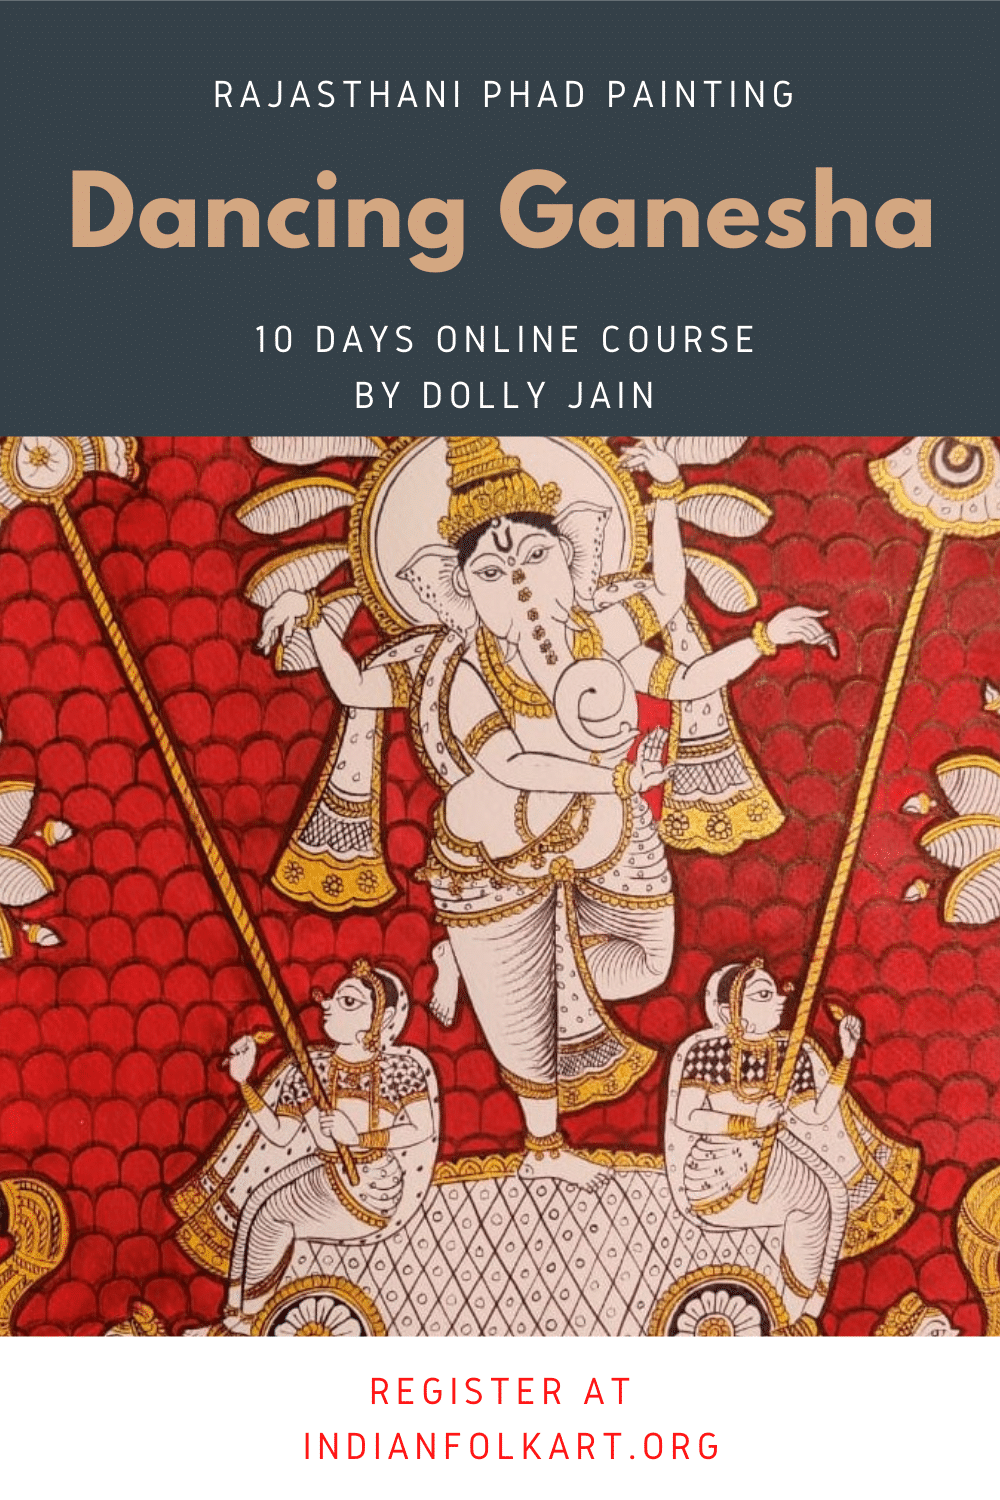 Online Rajasthani Phad painting classes, Part 1- Dancing Ganesha [Course starting 15-April-2021]